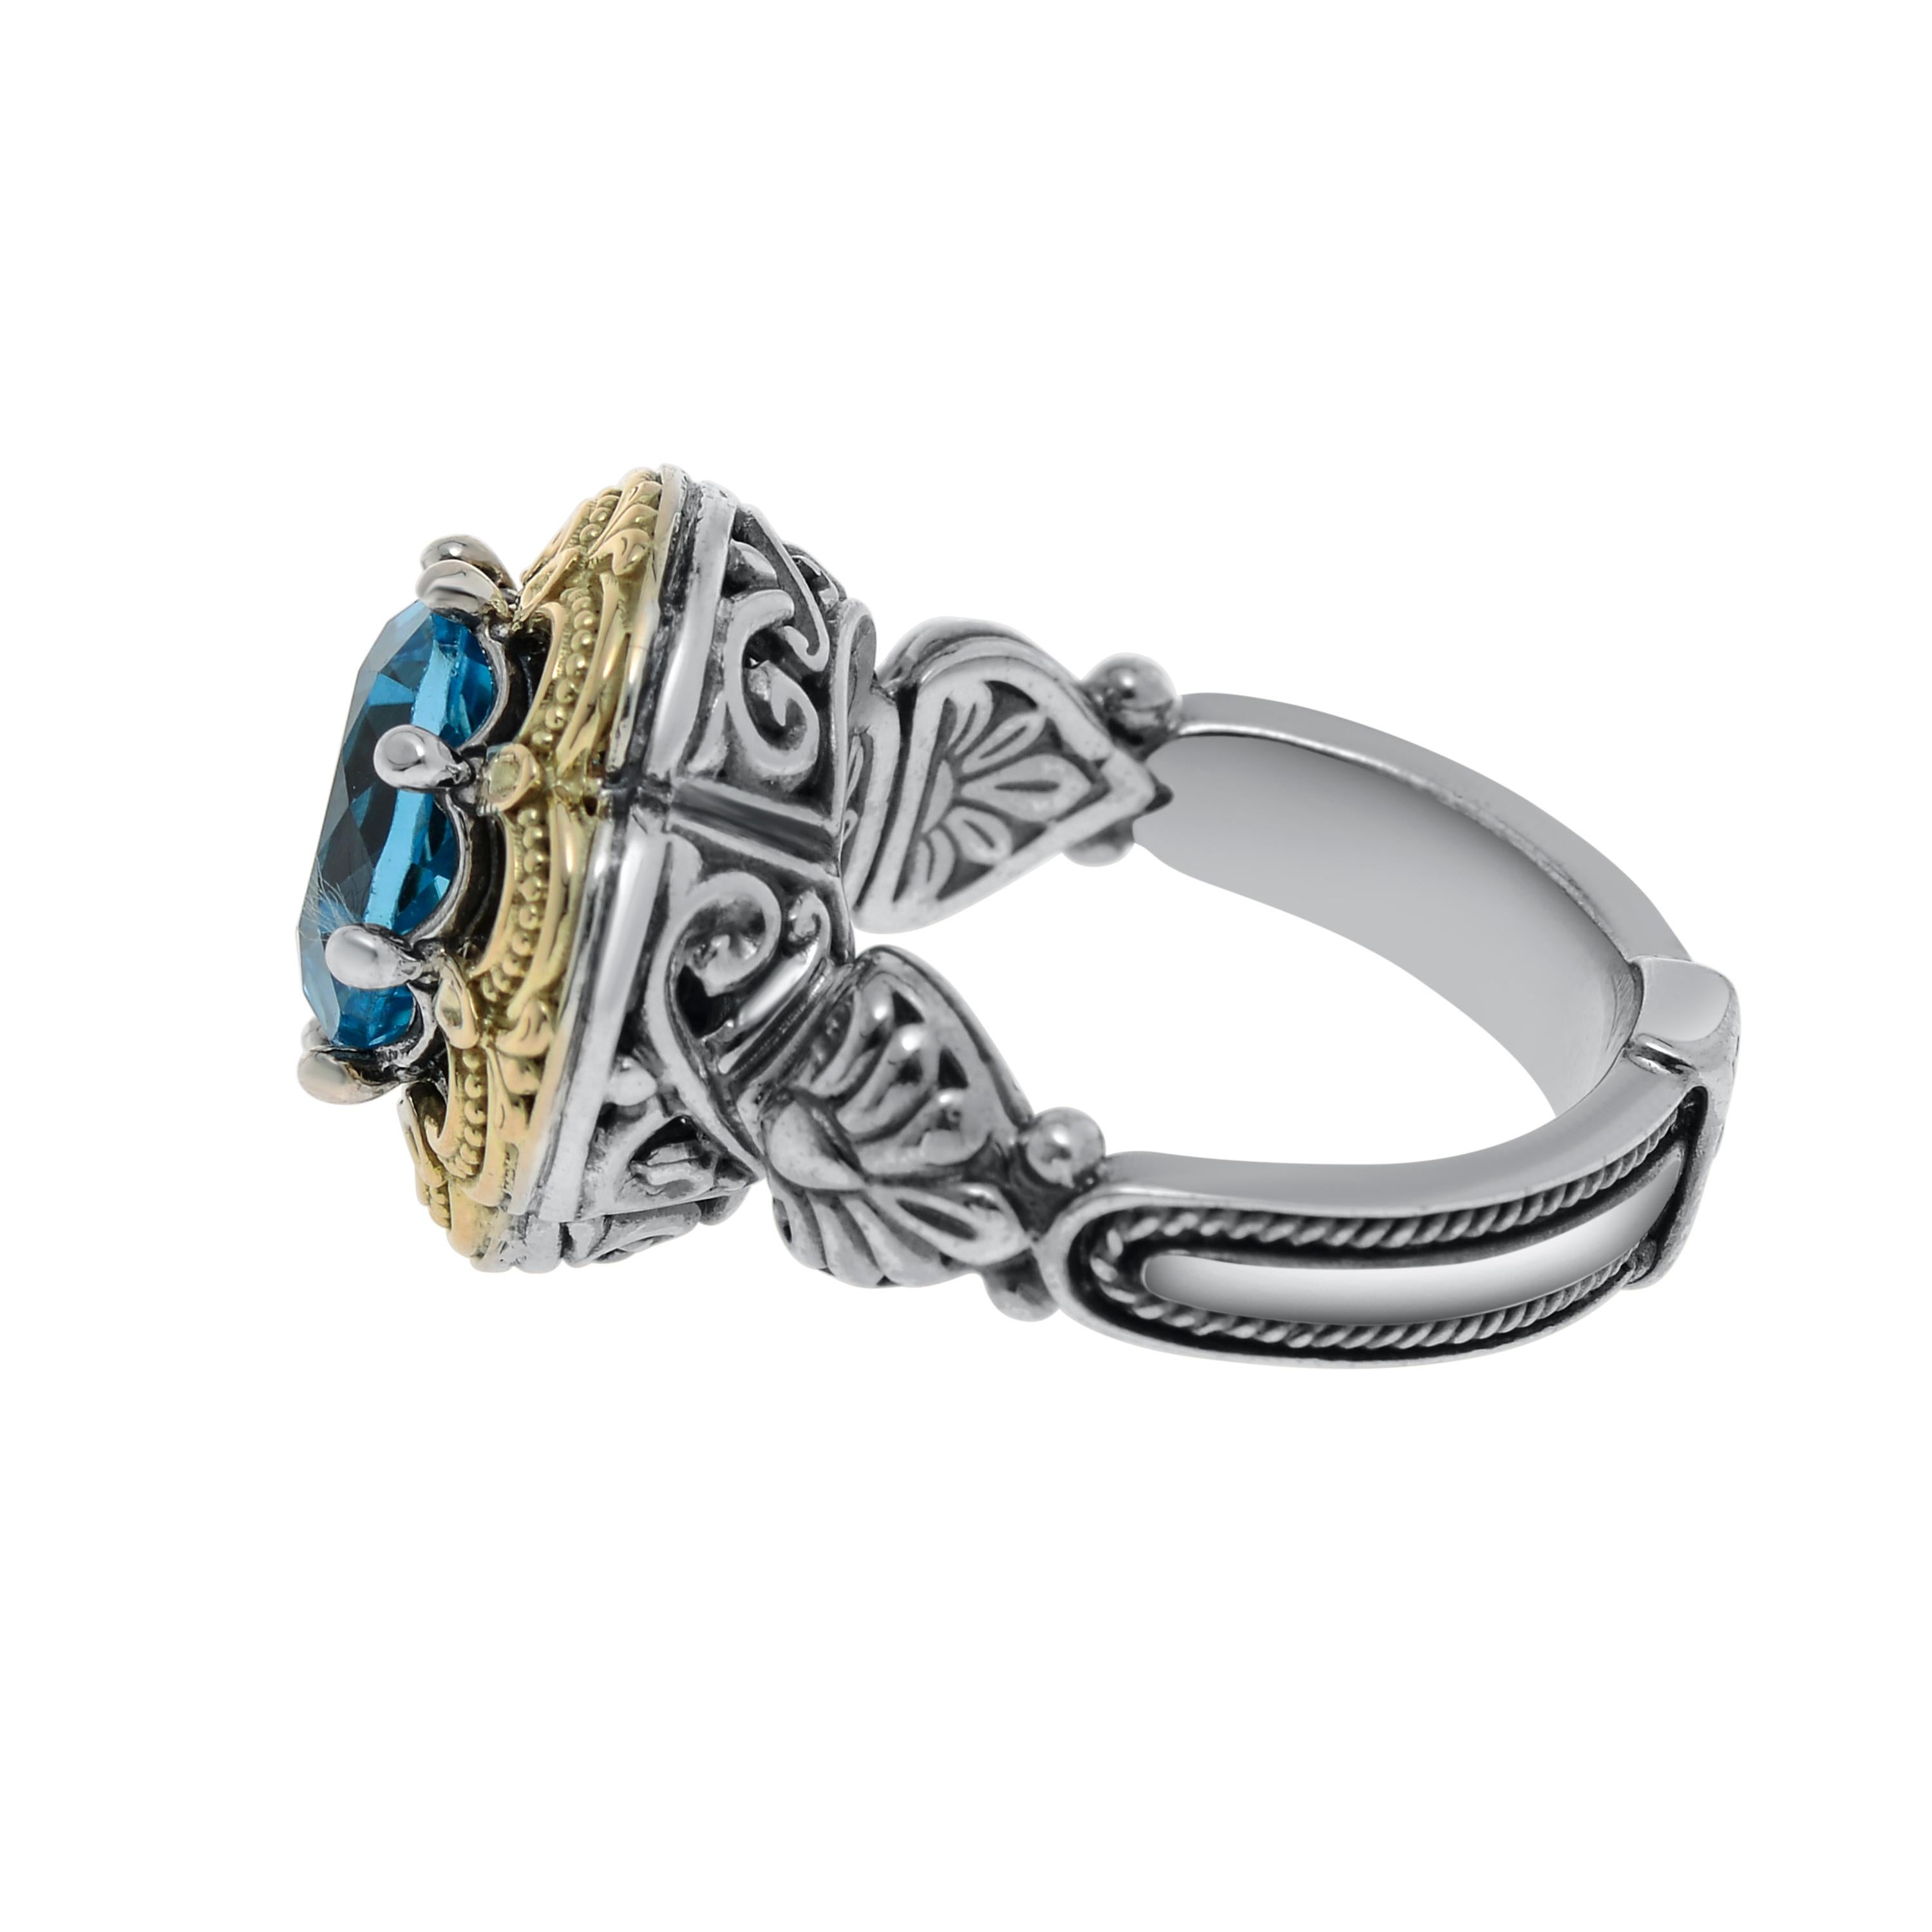 Contemporary Konstantino Sterling Silver & 18K Gold, Blue Topaz Ring sz 7 For Sale